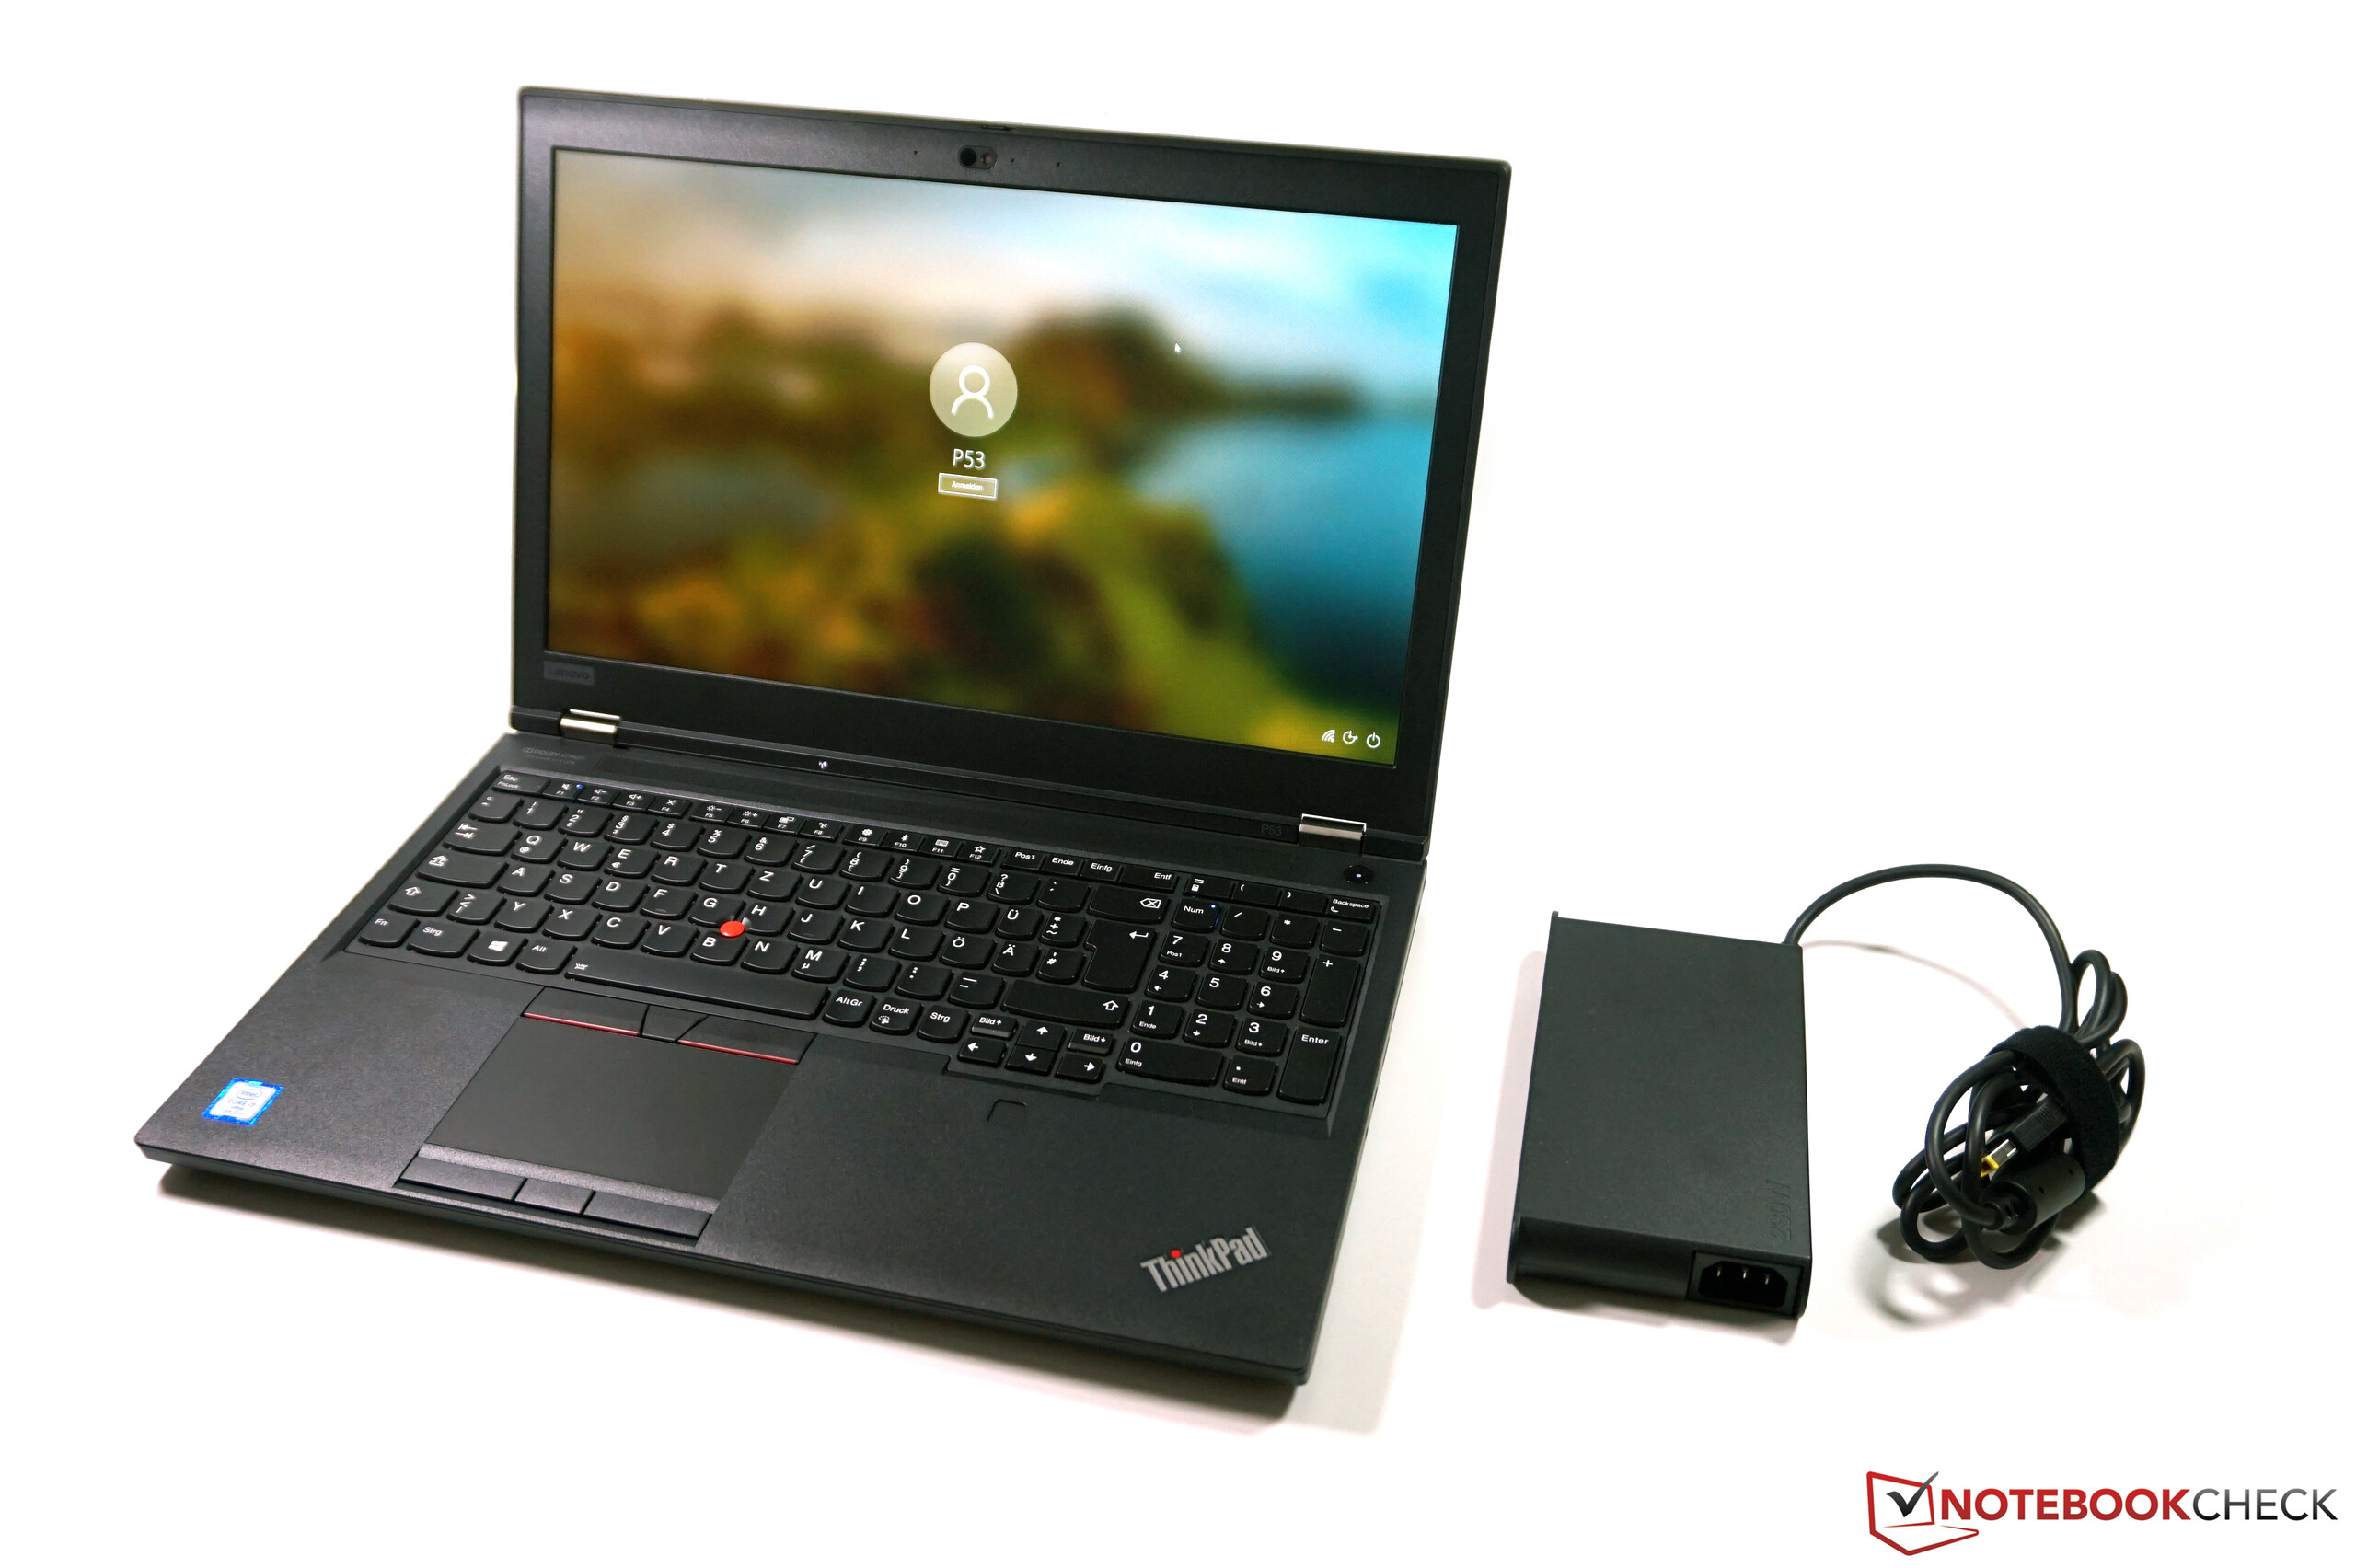 masser Banke fængelsflugt Lenovo ThinkPad P53 in Review: Classic workstation with a lot of GPU  performance - NotebookCheck.net Reviews